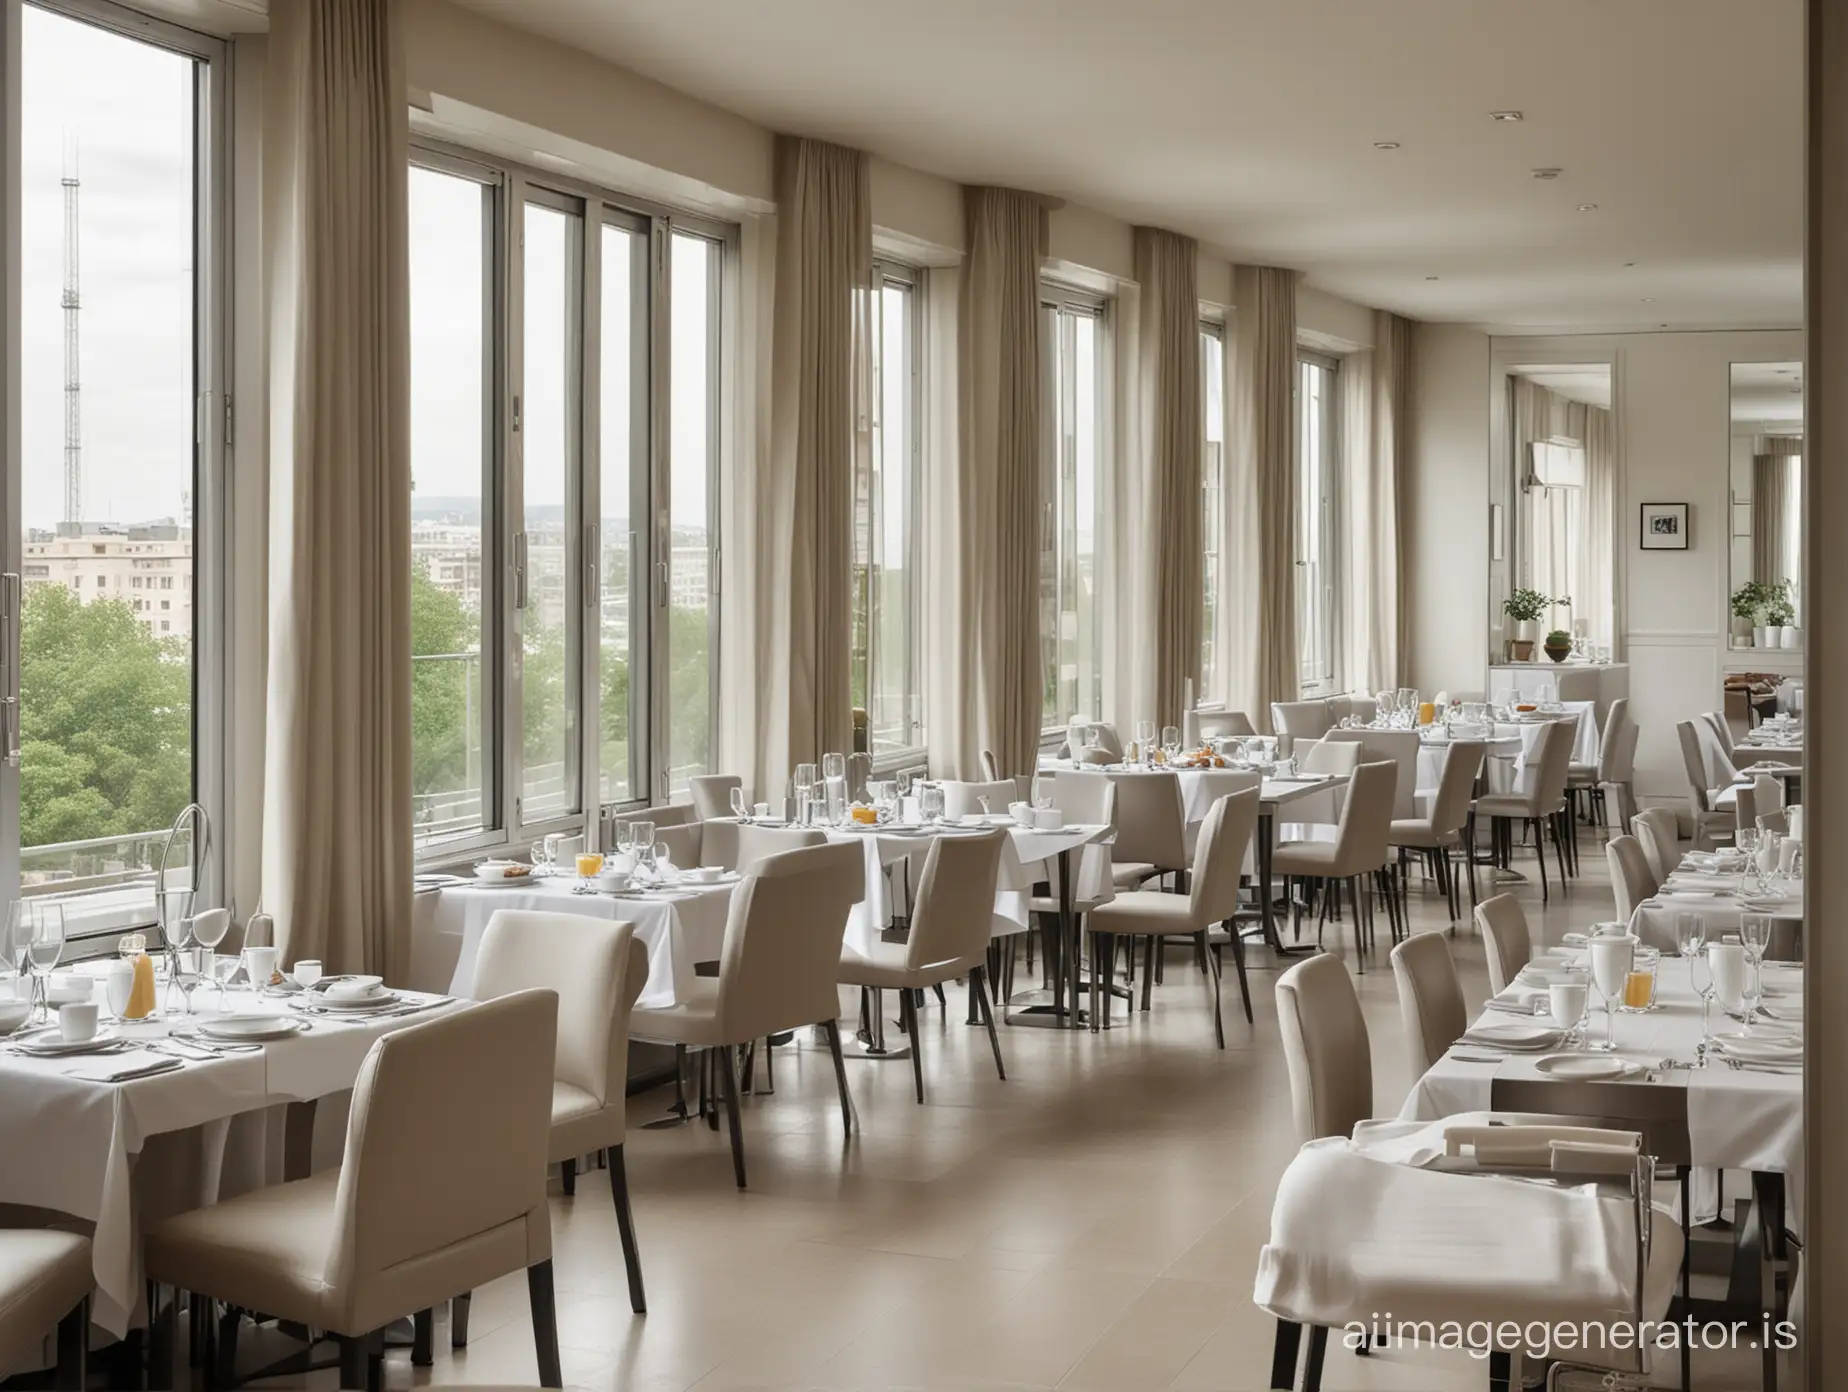 a  breakfast room in a big hotel.  The room is long and narrow. The interior design is contemporary with modern steel furniture with white color.  the  windows are full height like a courtain wall. The windows don't have courtains.